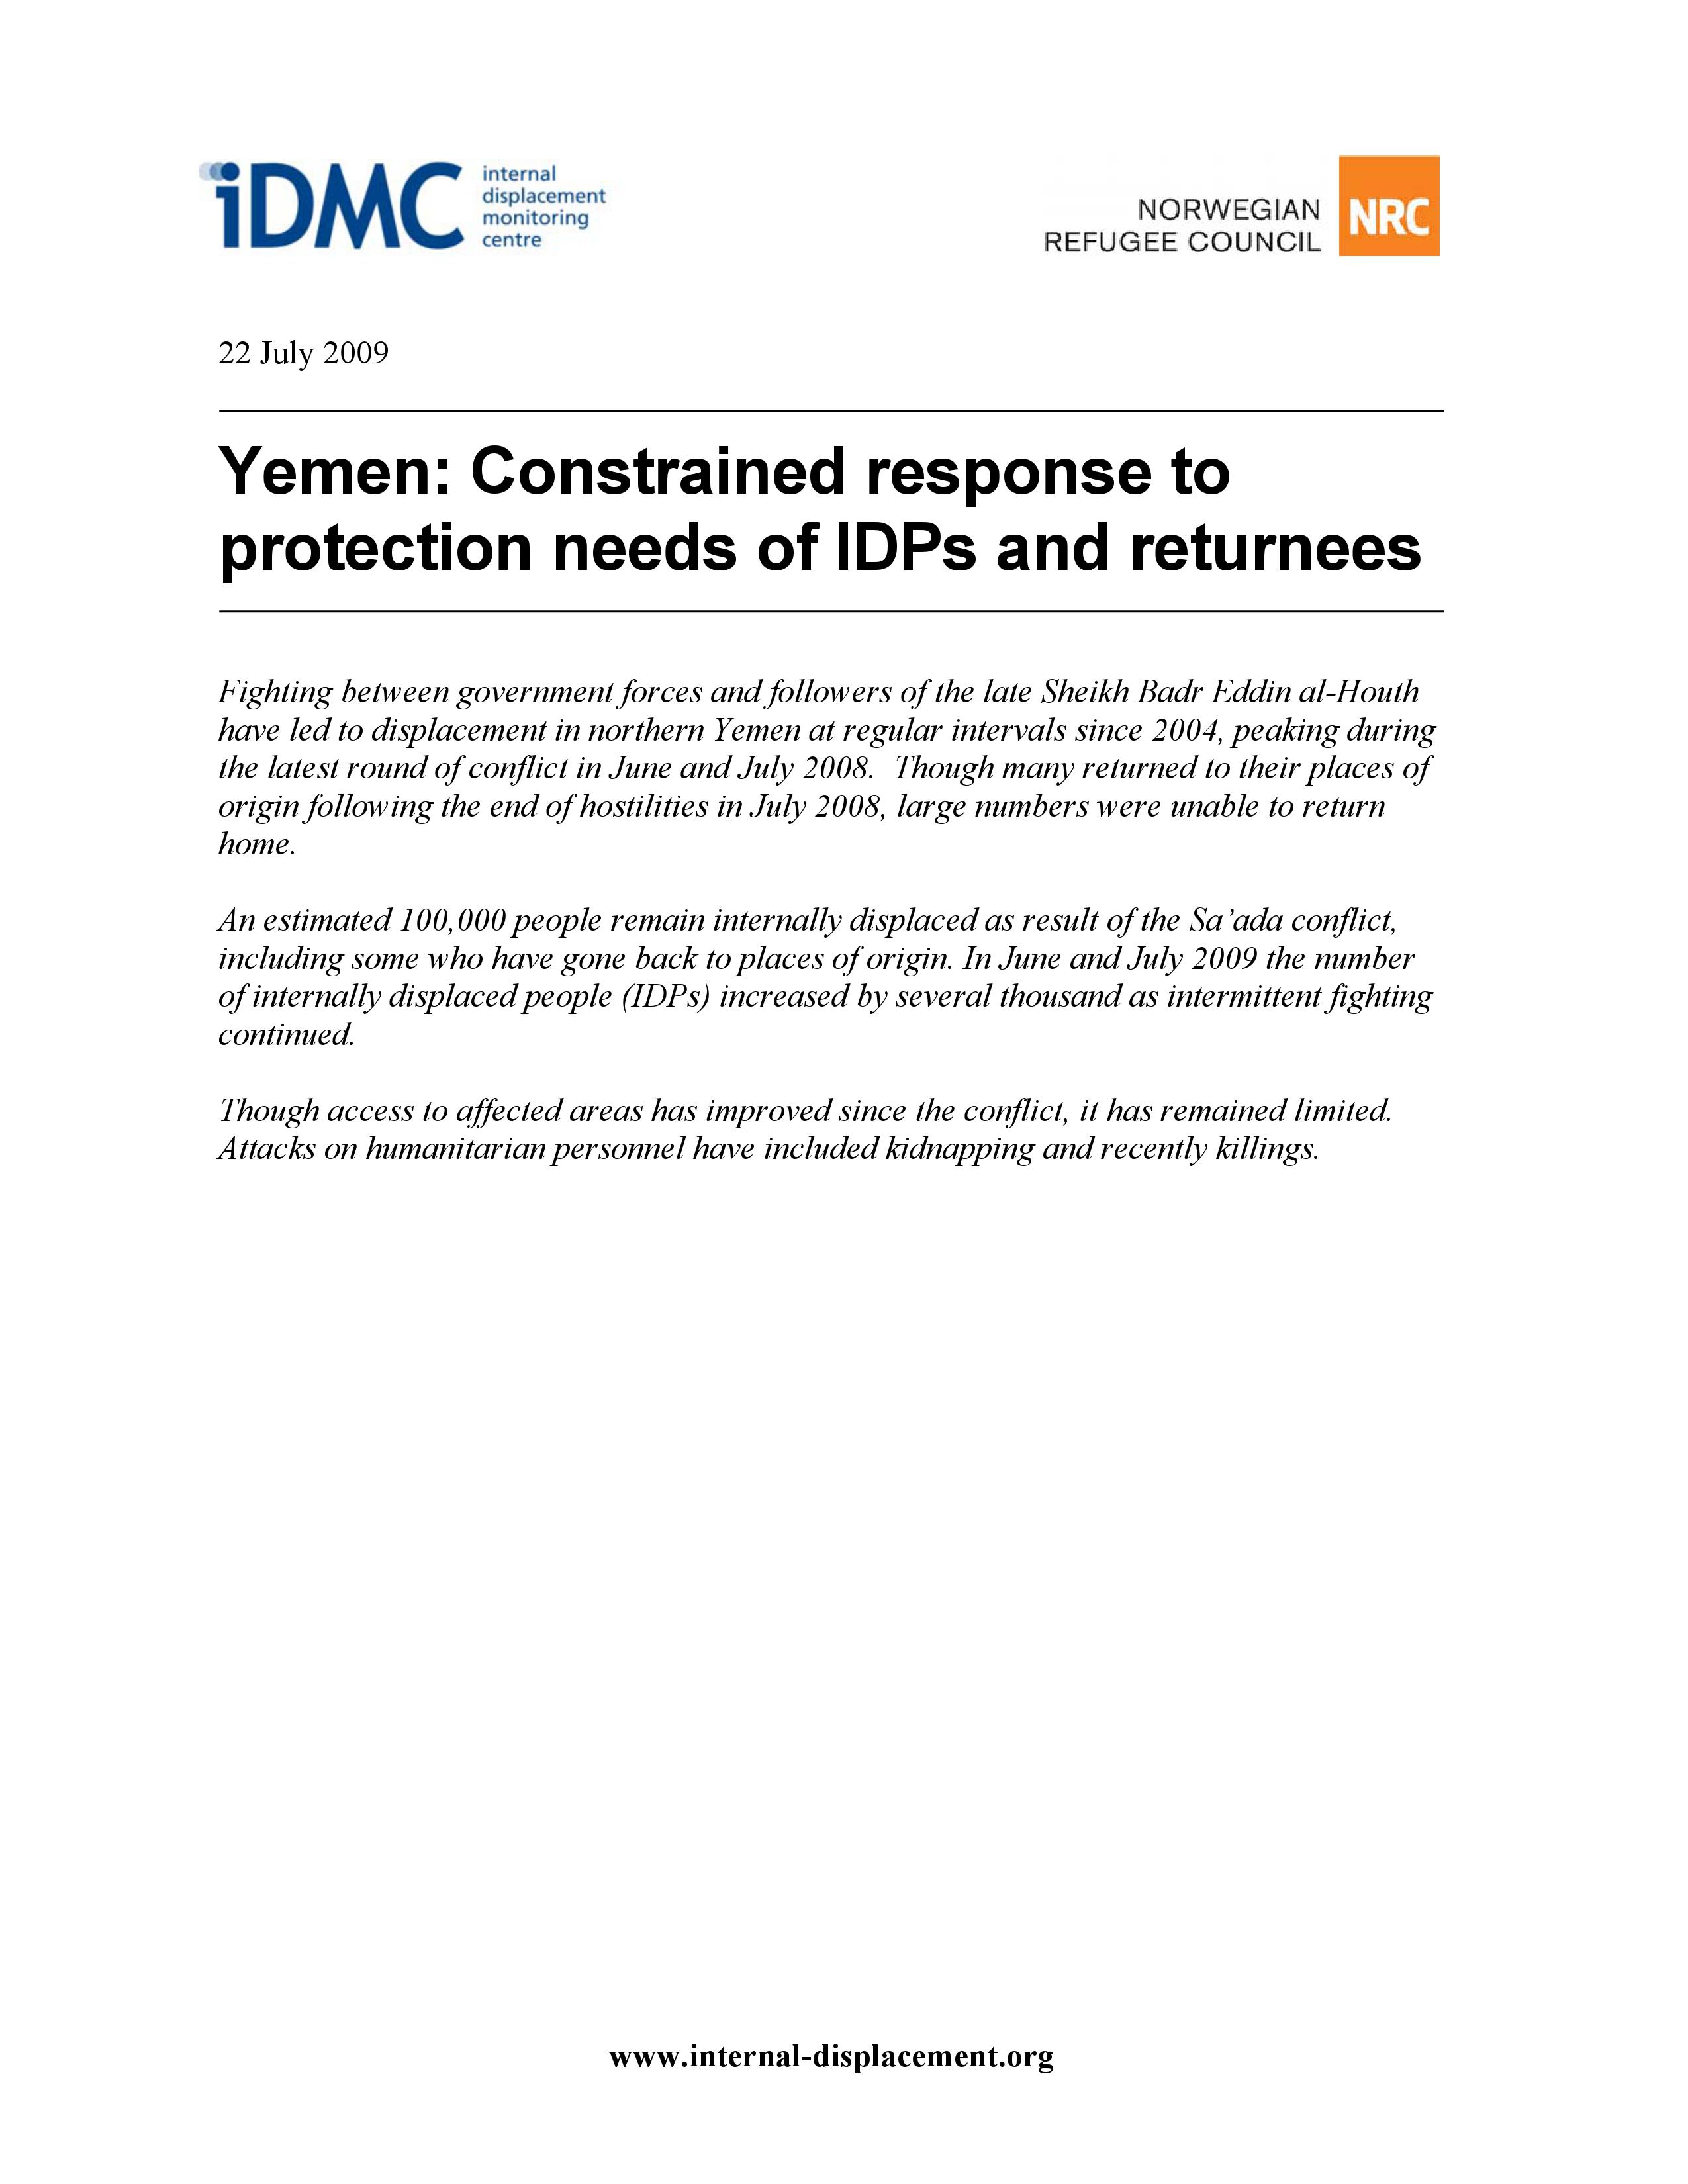 Yemen: Constrained response to protection needs of IDPs and returnees